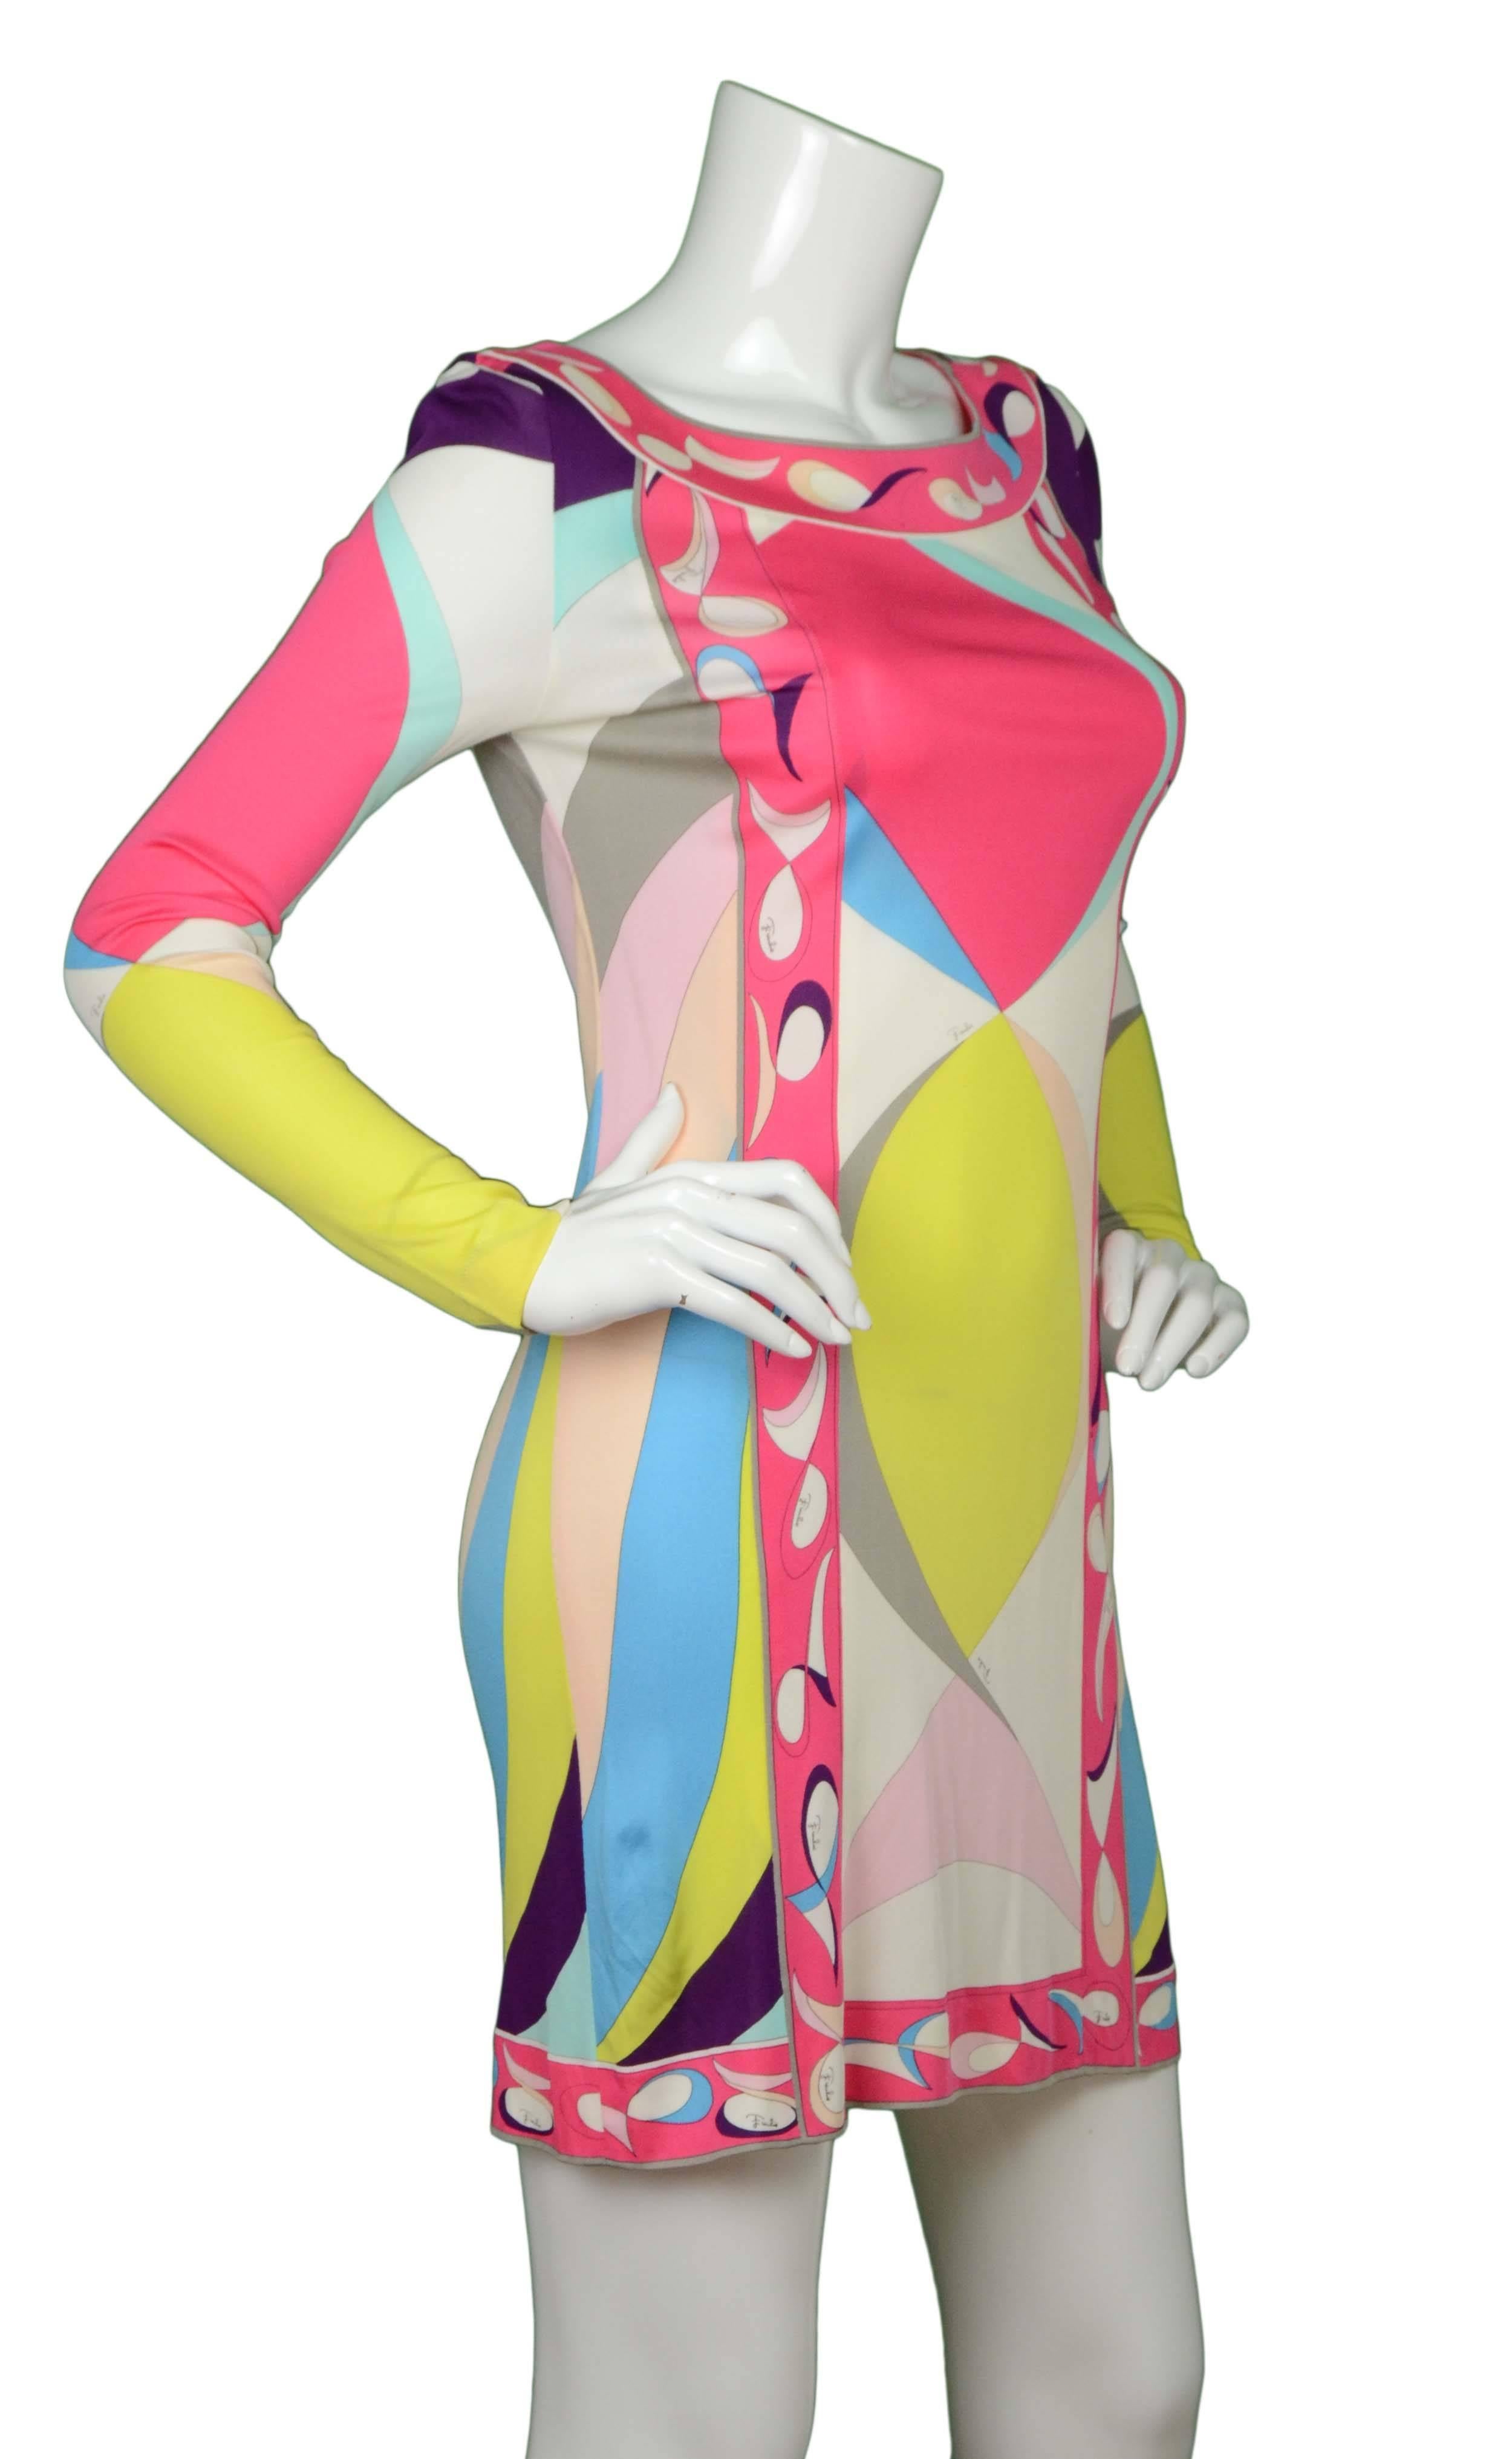 Emilio Pucci Multi-Colored Geometric Shift Dress 
Made In: Italy
Color: White, yellow, pink, blue, and purple
Composition: 100% rayon
Lining: None
Closure/Opening: Pull over
Exterior Pockets: None
Interior Pockets: None
Overall Condition: